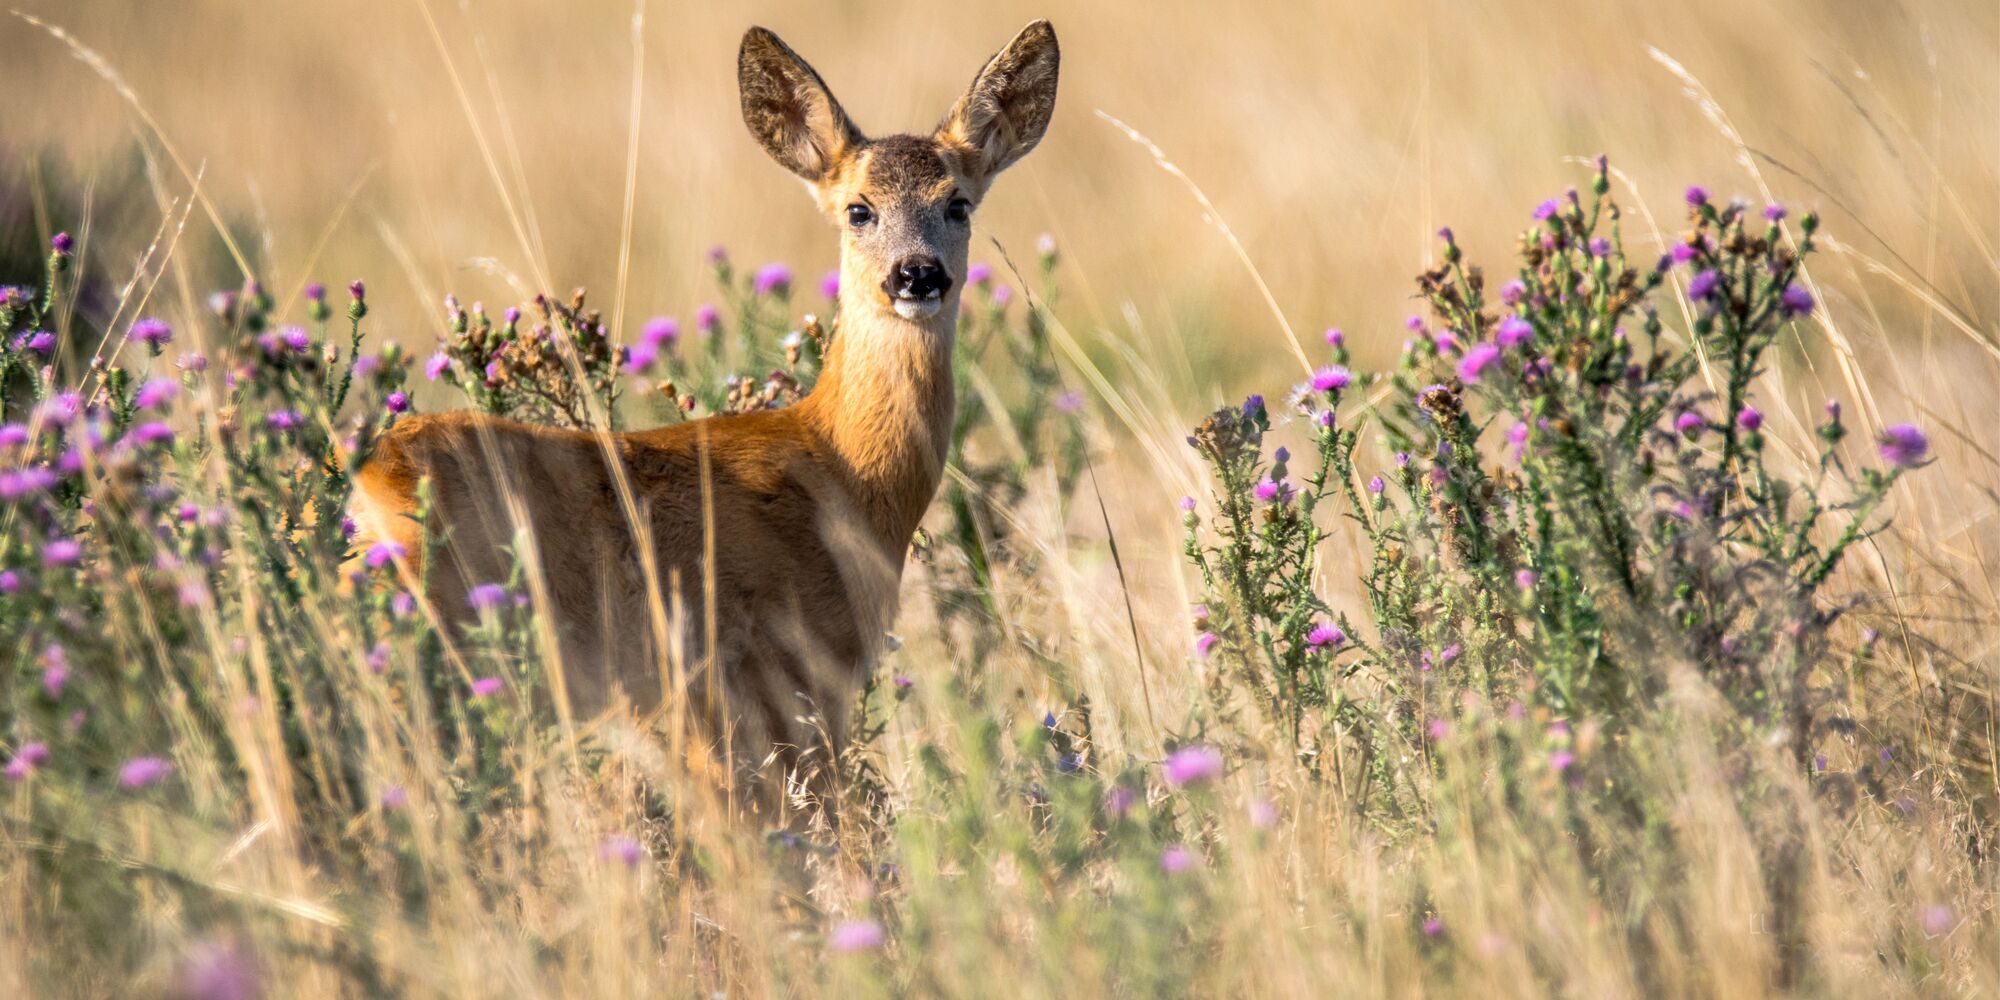 A roe deer in long grass looking towards the viewer